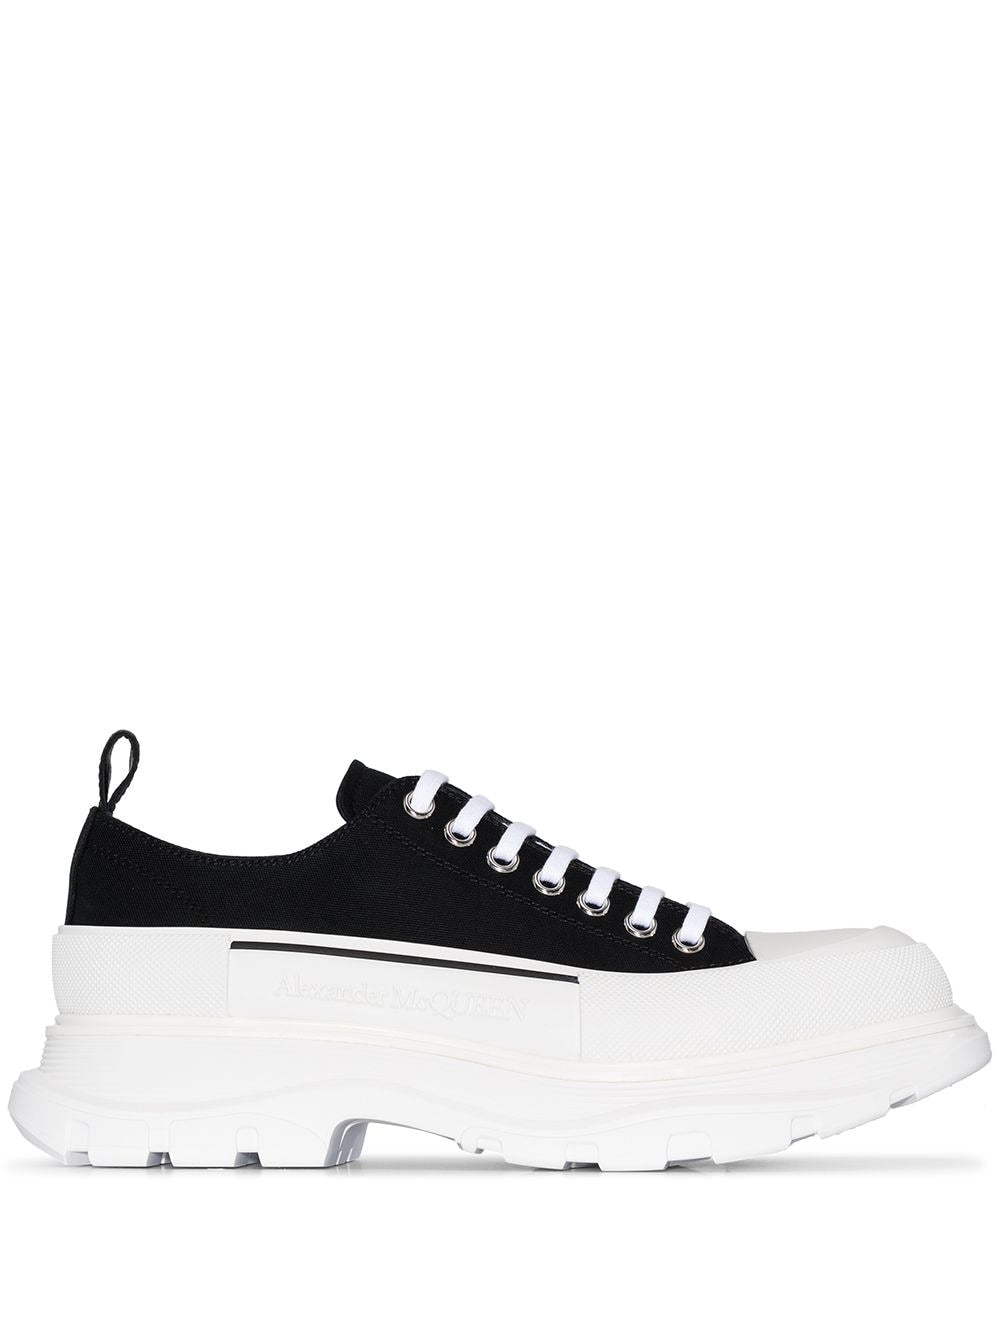 ALEXANDER MCQUEEN Tread Slick Lace-up Sneakers Black/White